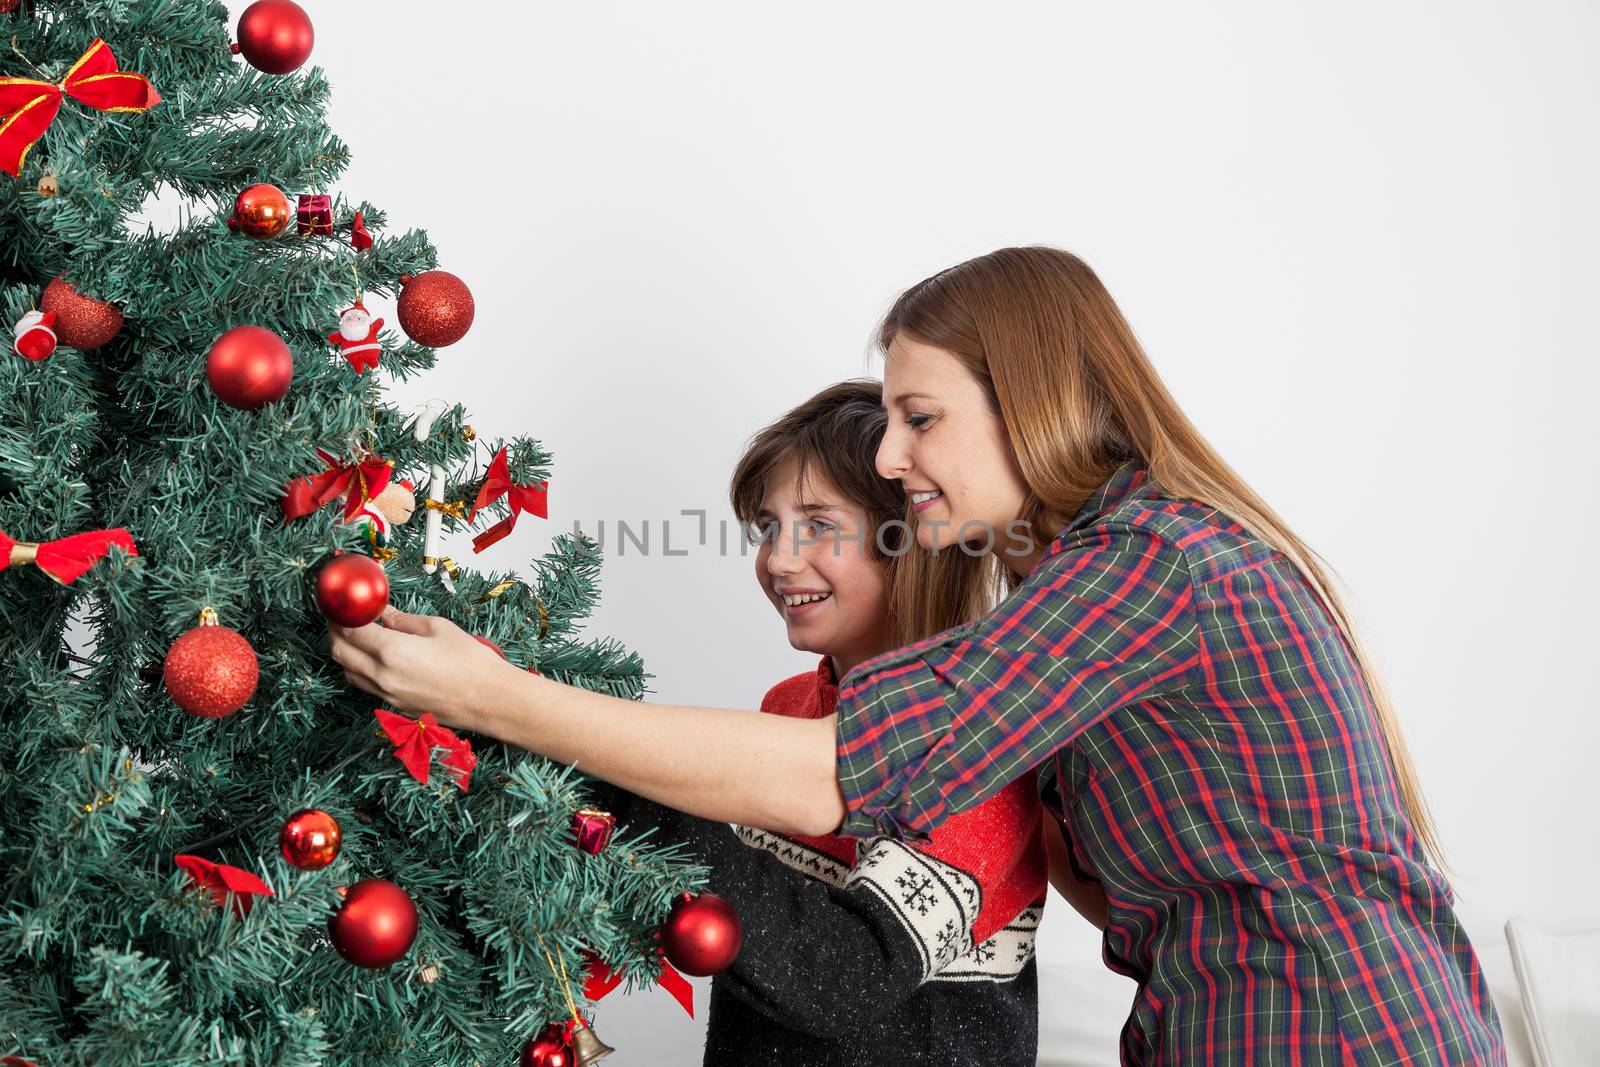 10-12, 30-35, adult, background, balls, boy, caucasian, celebration, christmas, claus, decorating, decoration, decorations, family, female, festive, fun, garland, green, hand, happy, holiday, home, kid, love, model, mom, mother, old, ornament, ornaments, person, present, smile, s,iling, property, red, releases, santa, seasonal, son, teen, teenager, tradition, tree, vertical, woman, x-mas, years, young